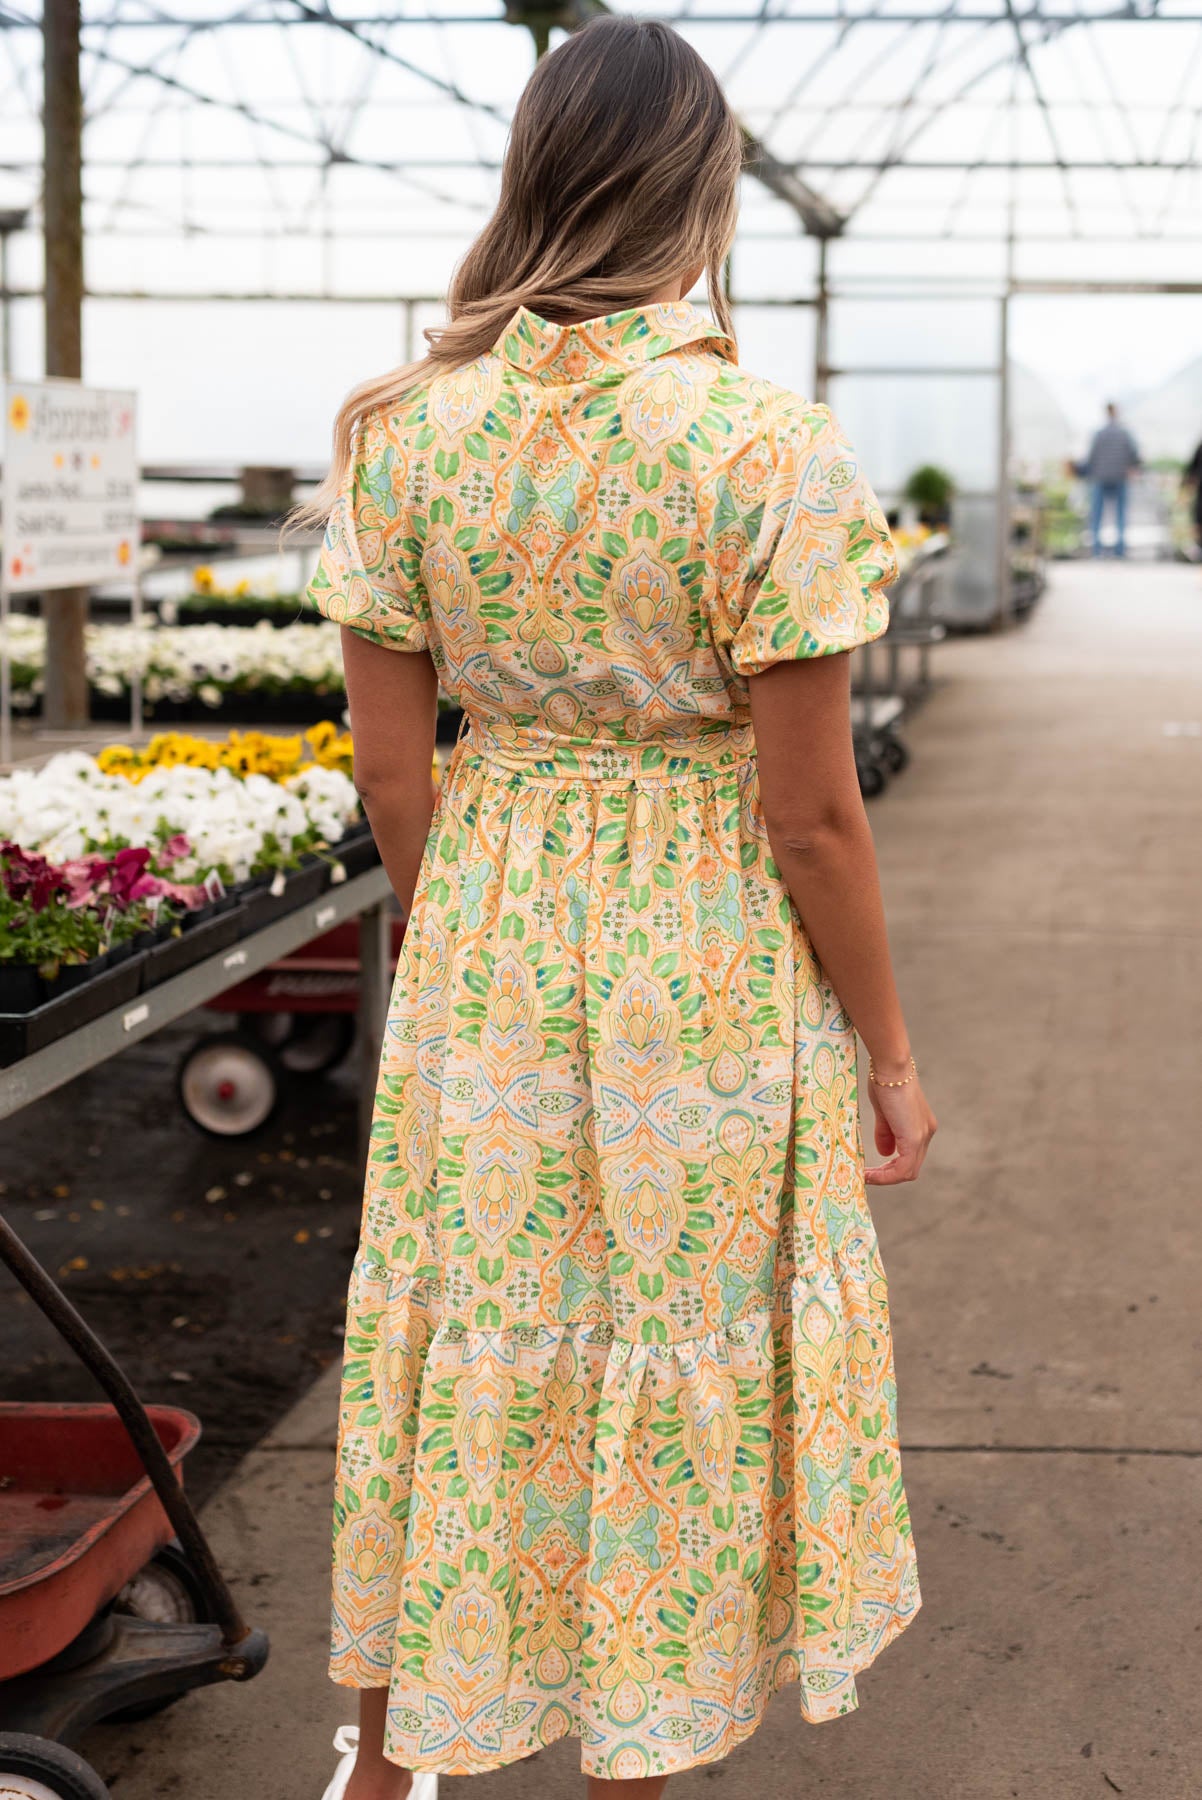 Back view of the green floral dress